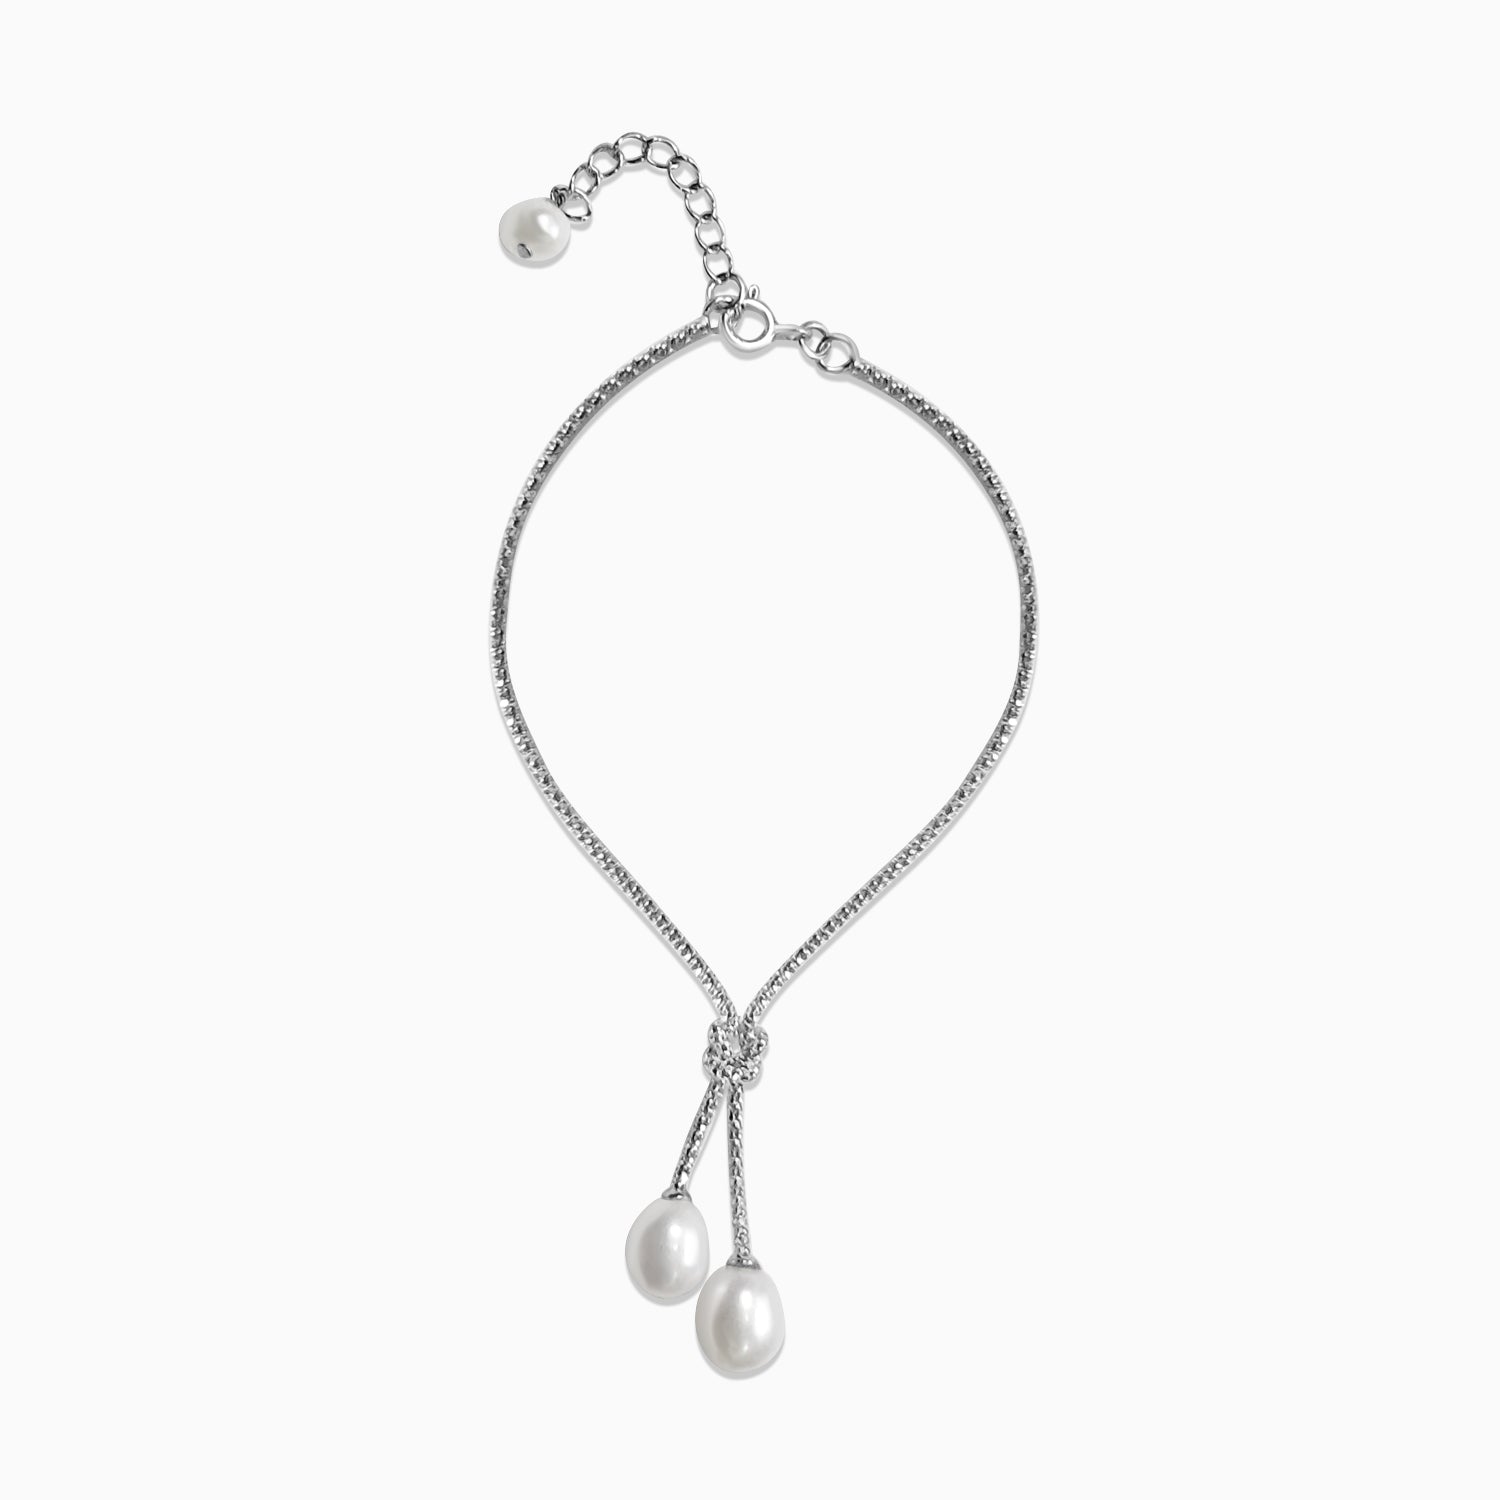 Silver Knotted Dangling Pearls Bracelet